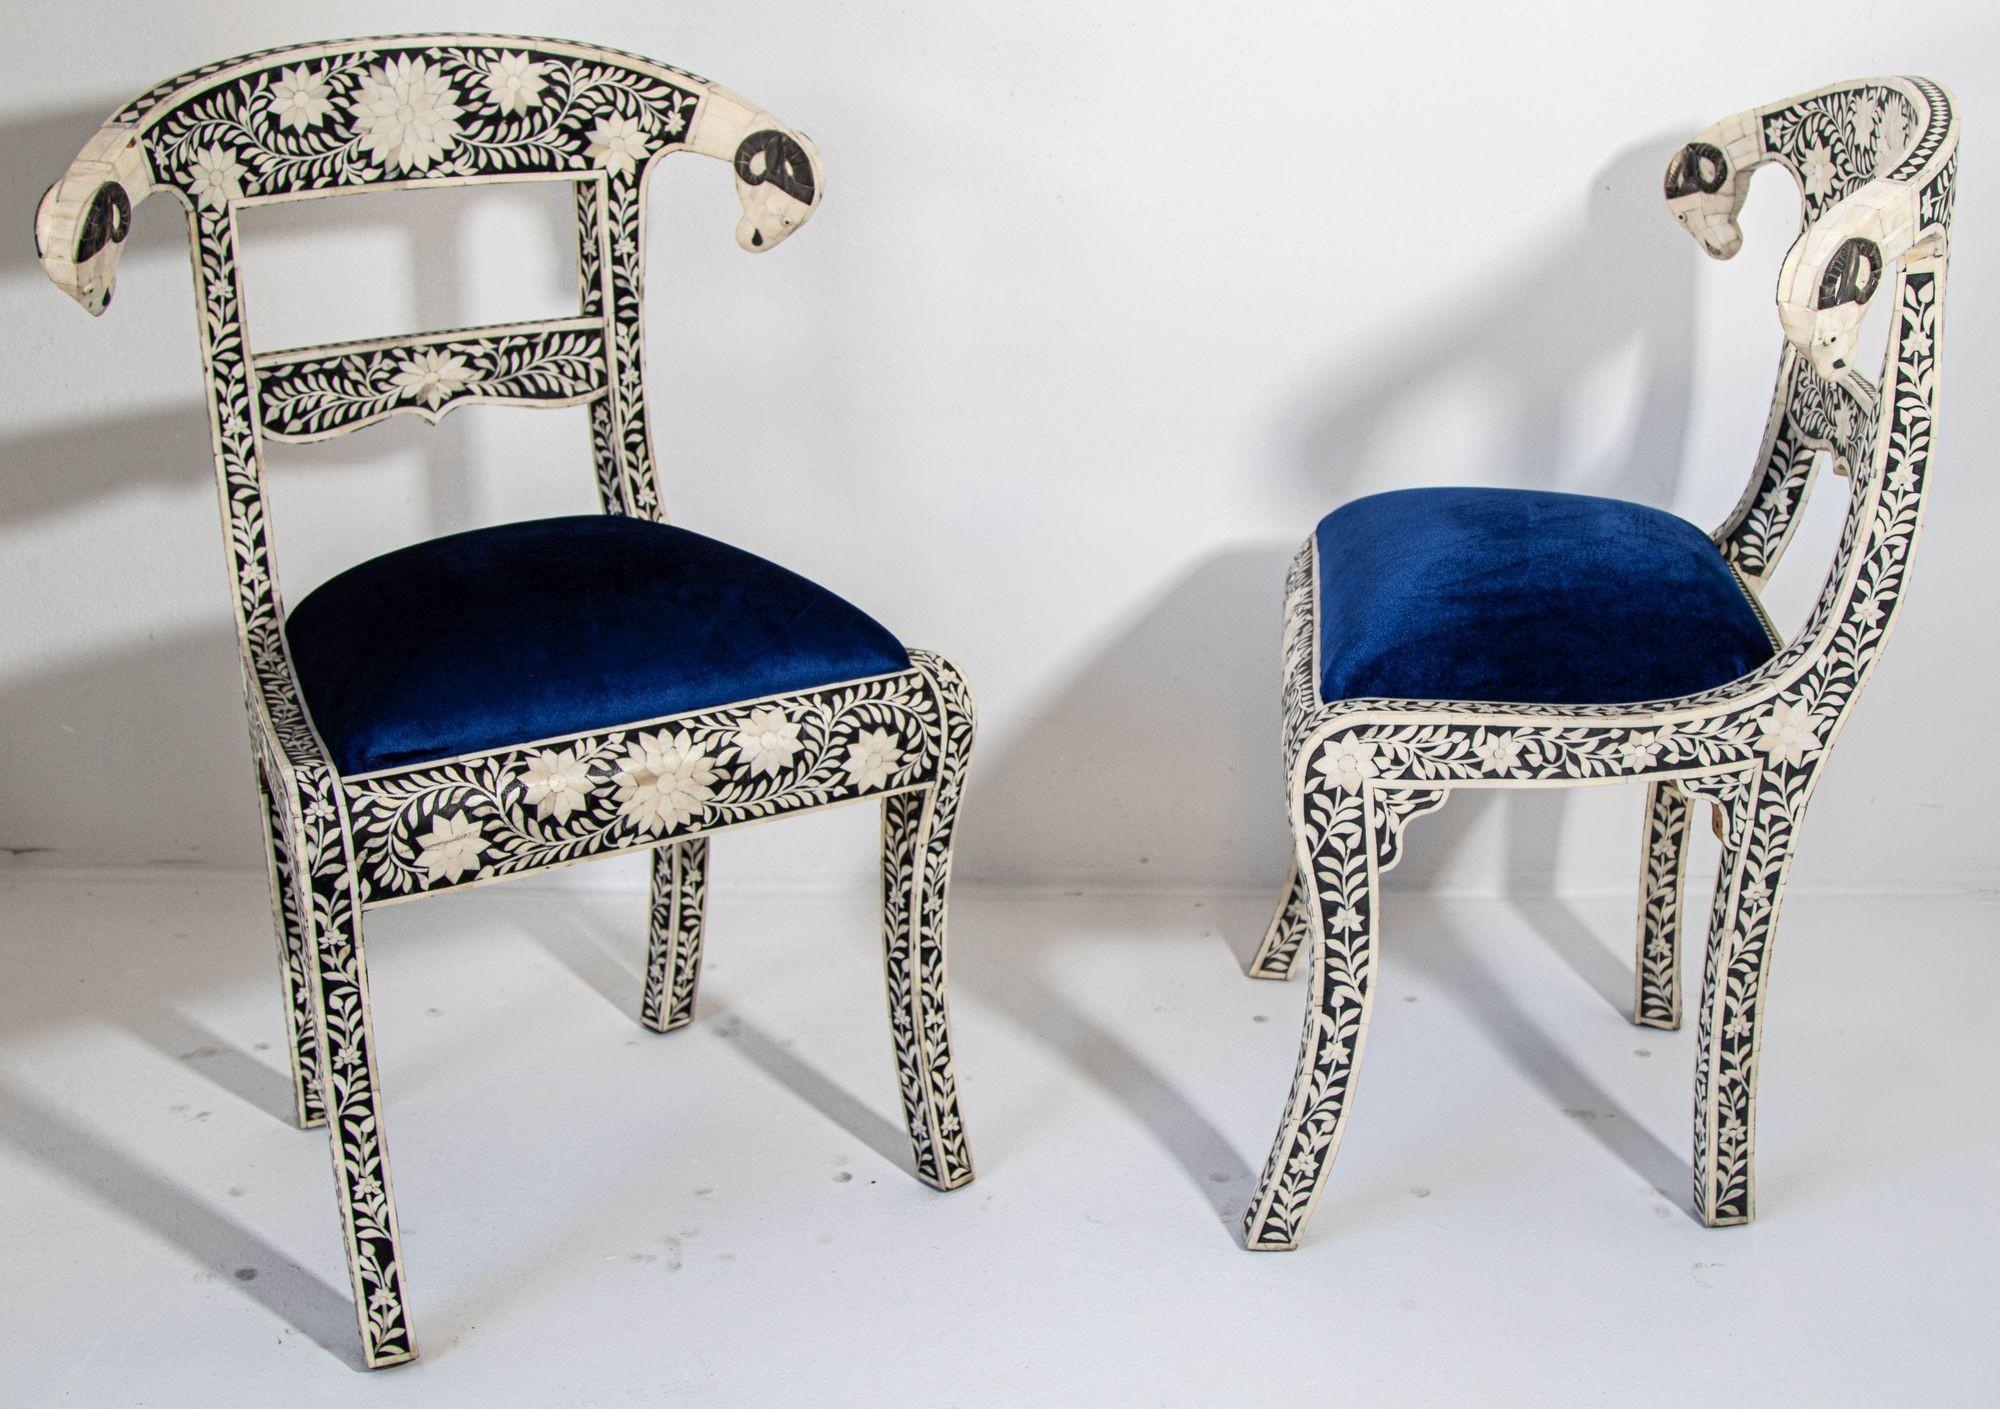 Antique Anglo-Indian Side Chairs with Ram's Head Bone Inlay Royal Blue Seat Pair In Good Condition For Sale In North Hollywood, CA